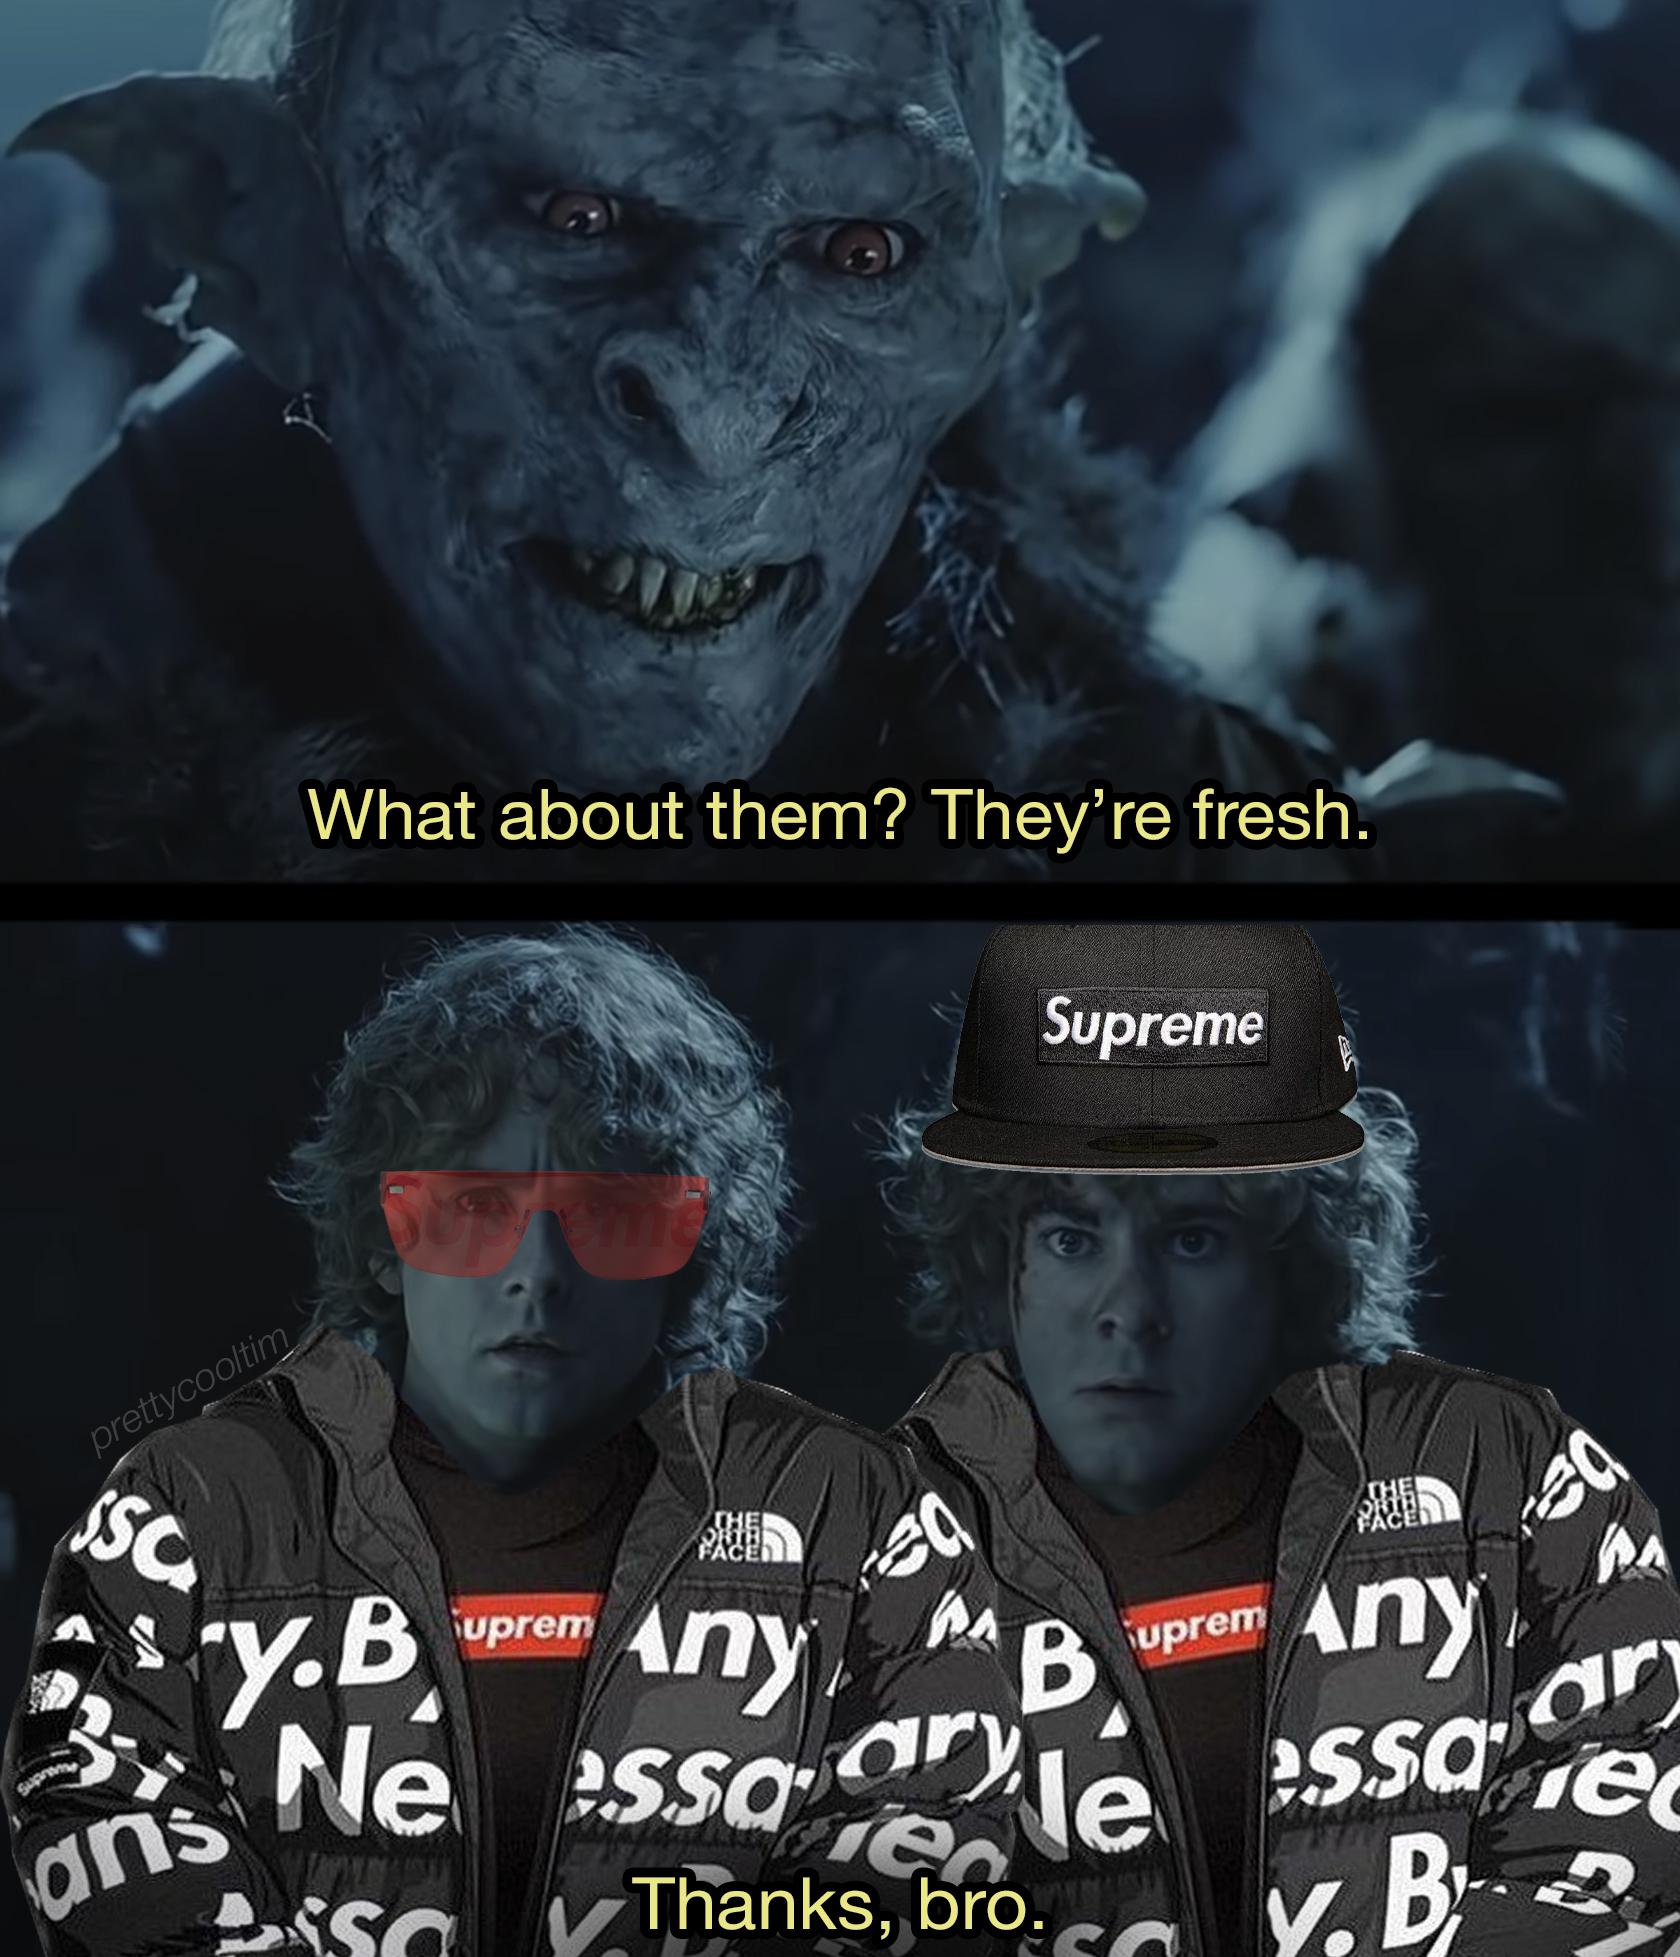 cant we have some meat orc - Supr prettycooltim Ssc What about them? They're fresh. y.B Any ans essa uprem ea Supreme Mb Thanks, bro. De uprem P Any ary essa rec y. B